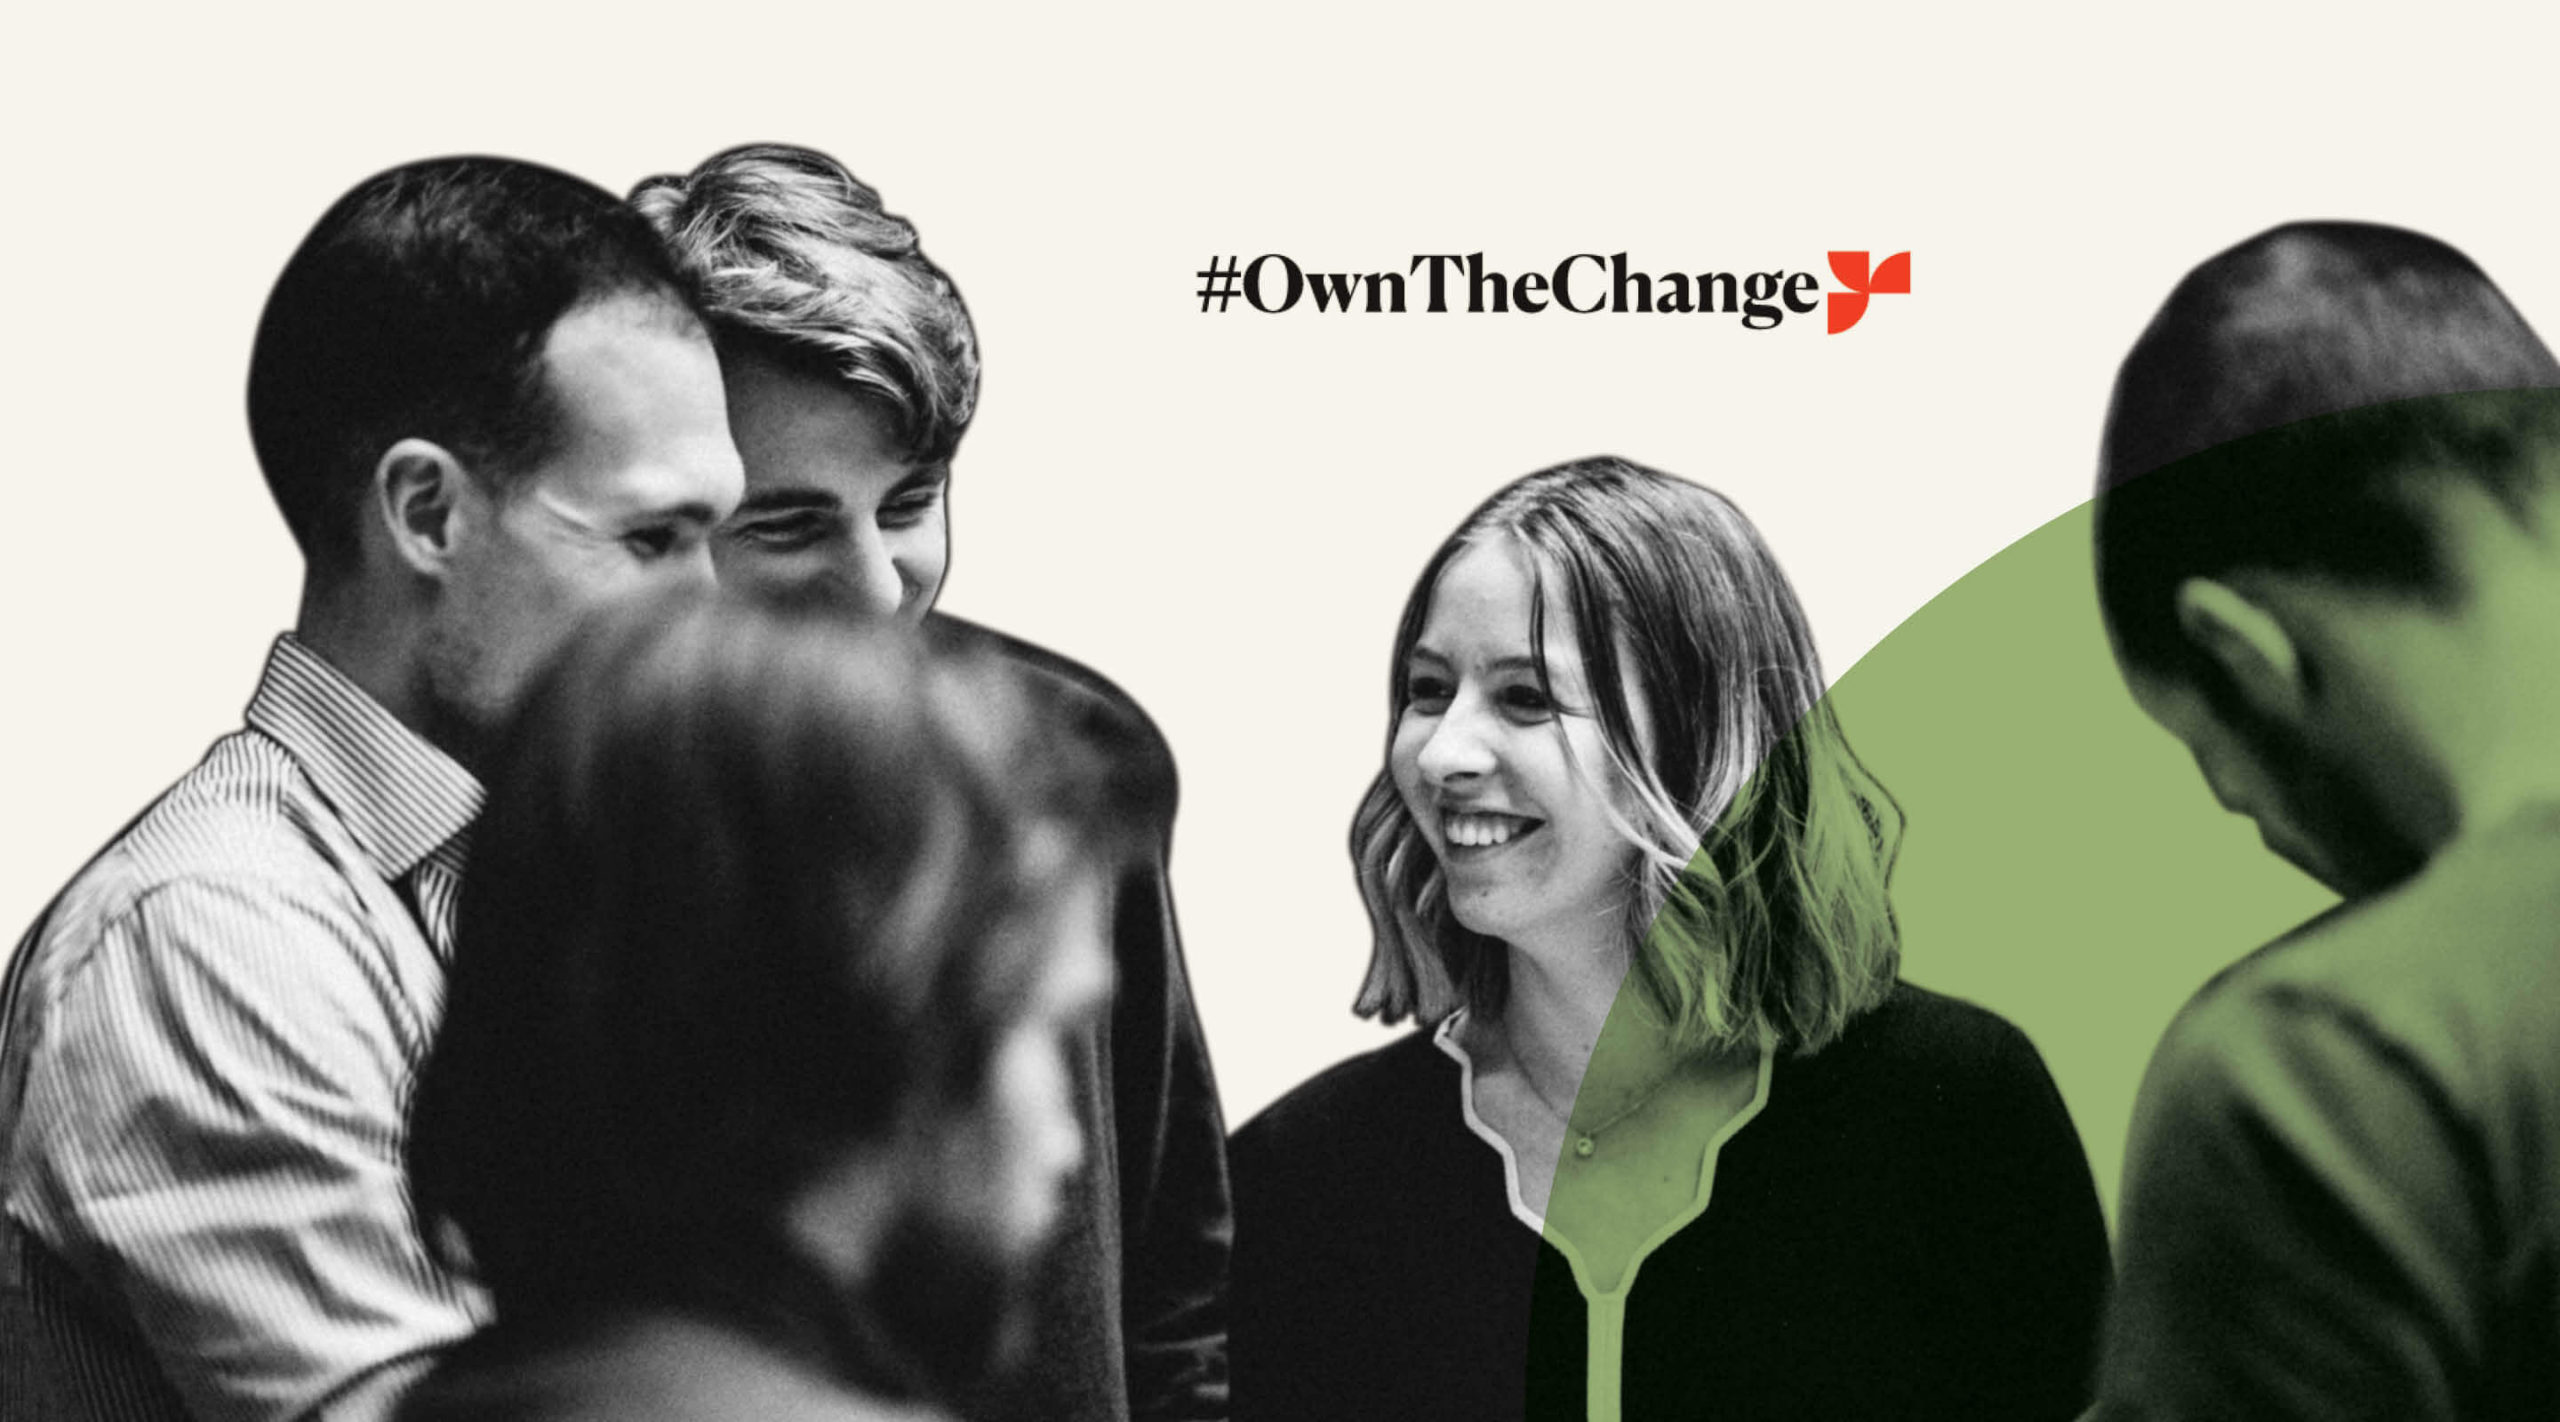 Crowdinvesting: it’s time to #OwnTheChange 